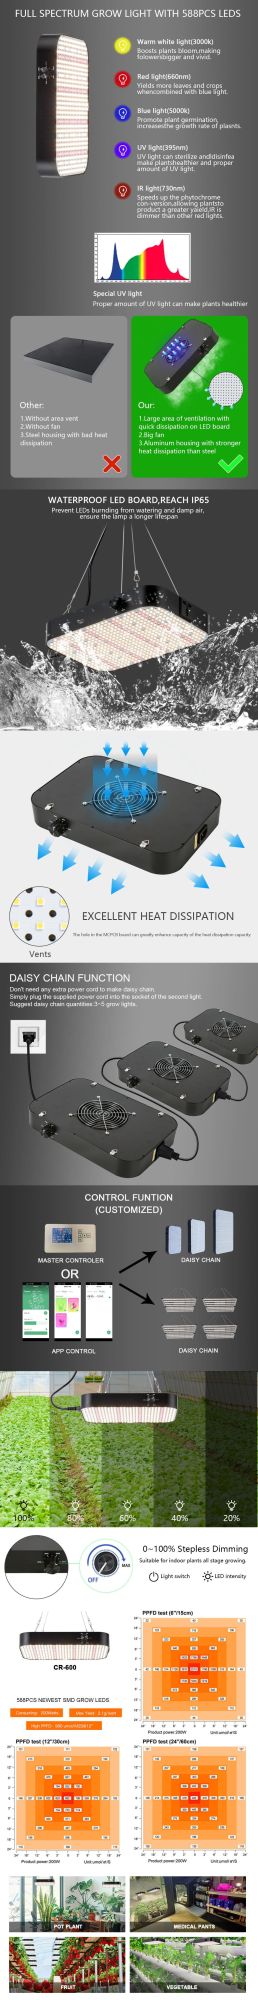 Newest Ideal Full Spectrum Plant Grow Light for 2X2 FT Coverage, Best Growing Lamps Cr600 200W with 588PCS LEDs & Daisy China Function & Strong Cool System